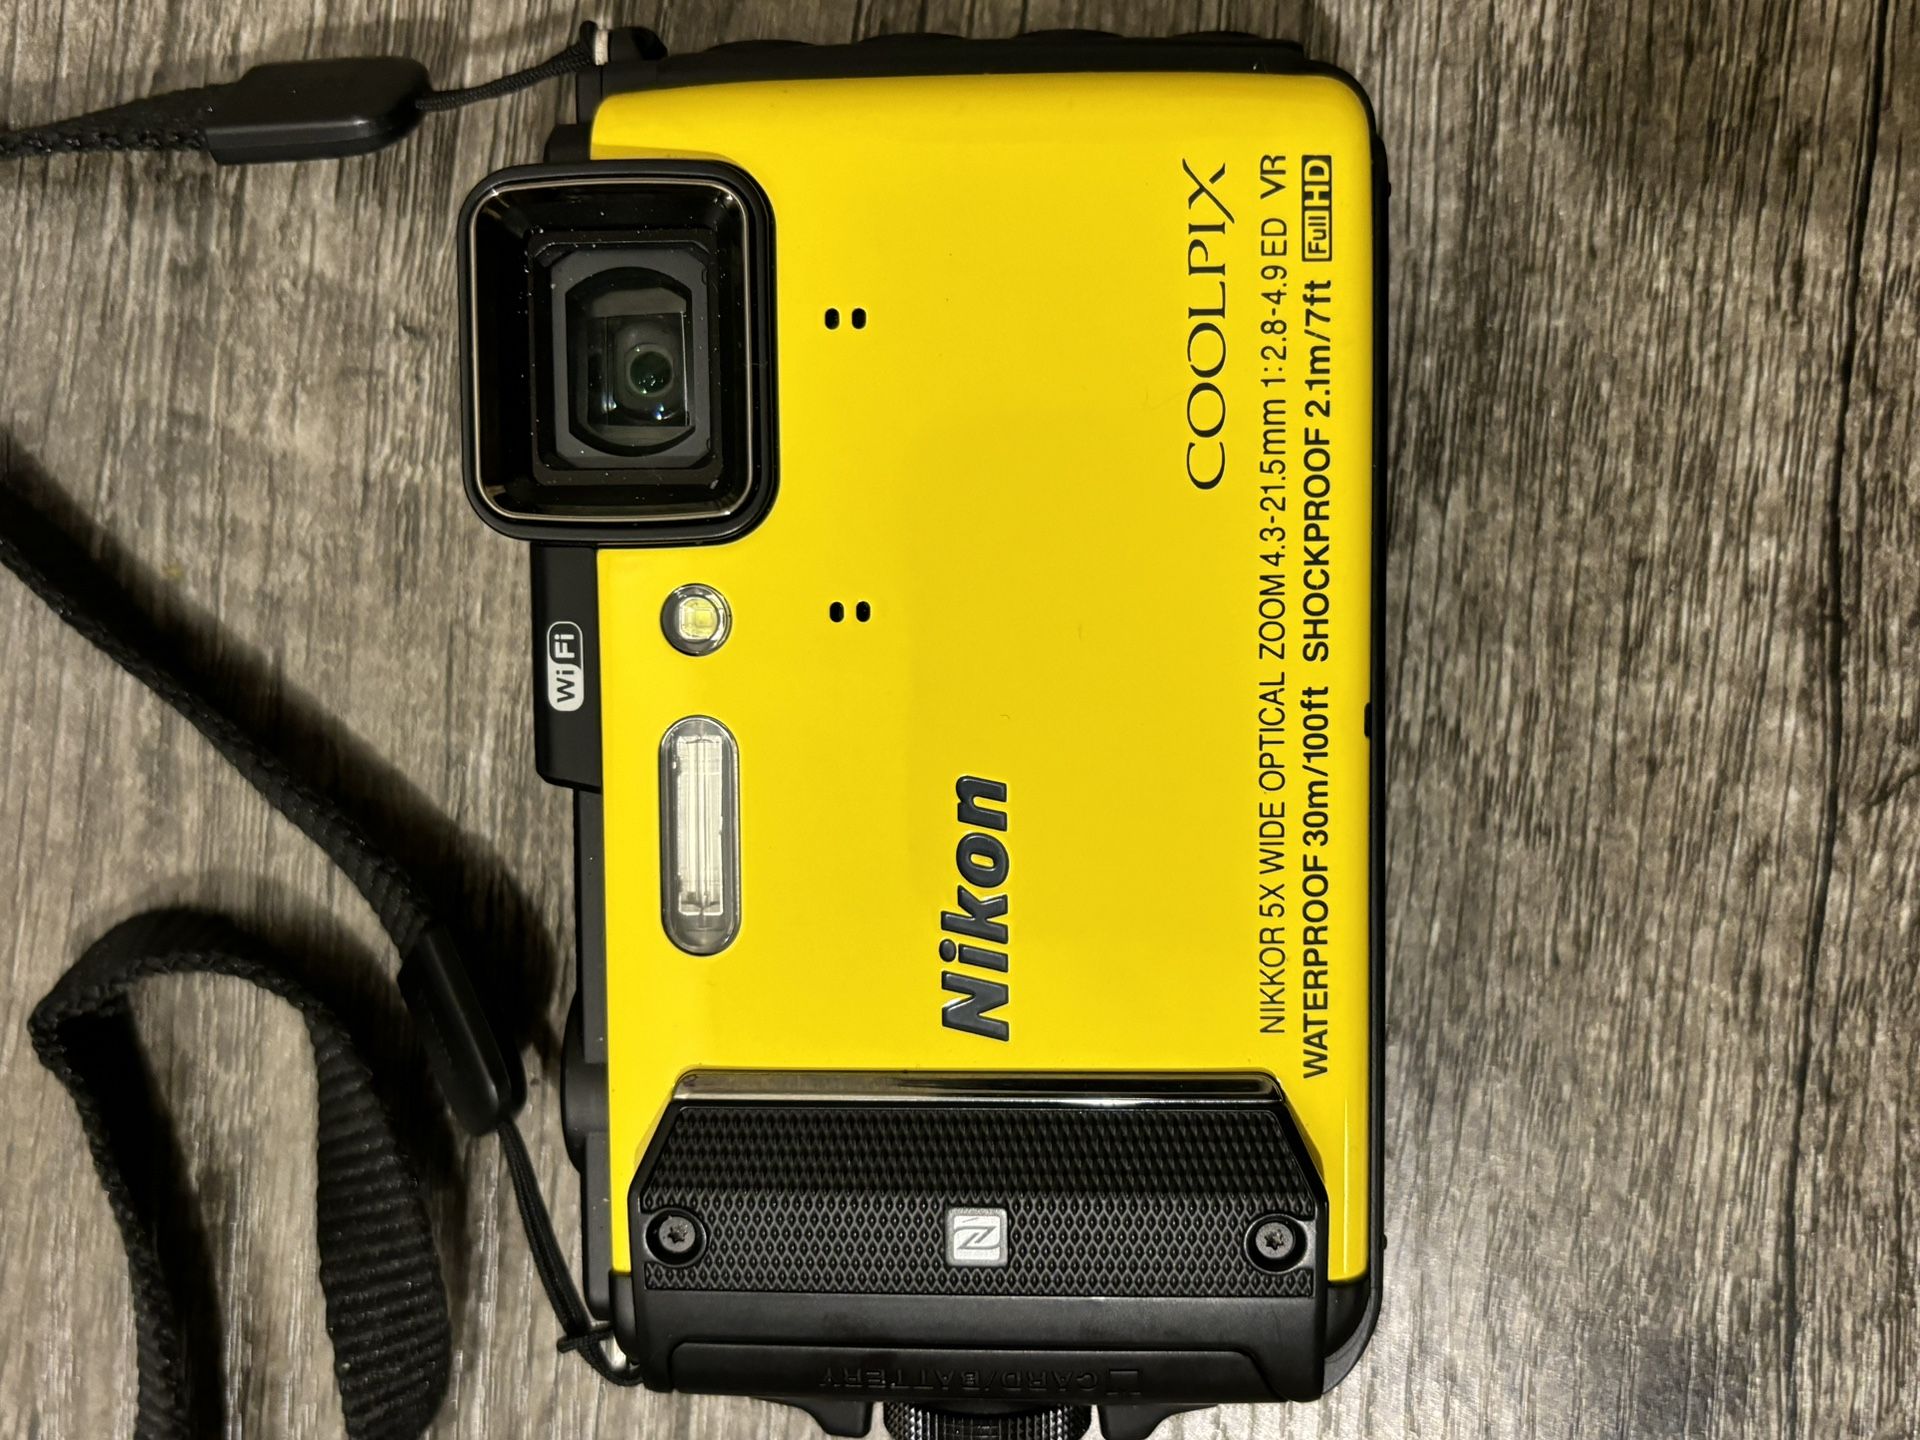 Nikon COOLPIX AW130 Waterproof Digital Camera with Built-In Wi-Fi (Yellow)